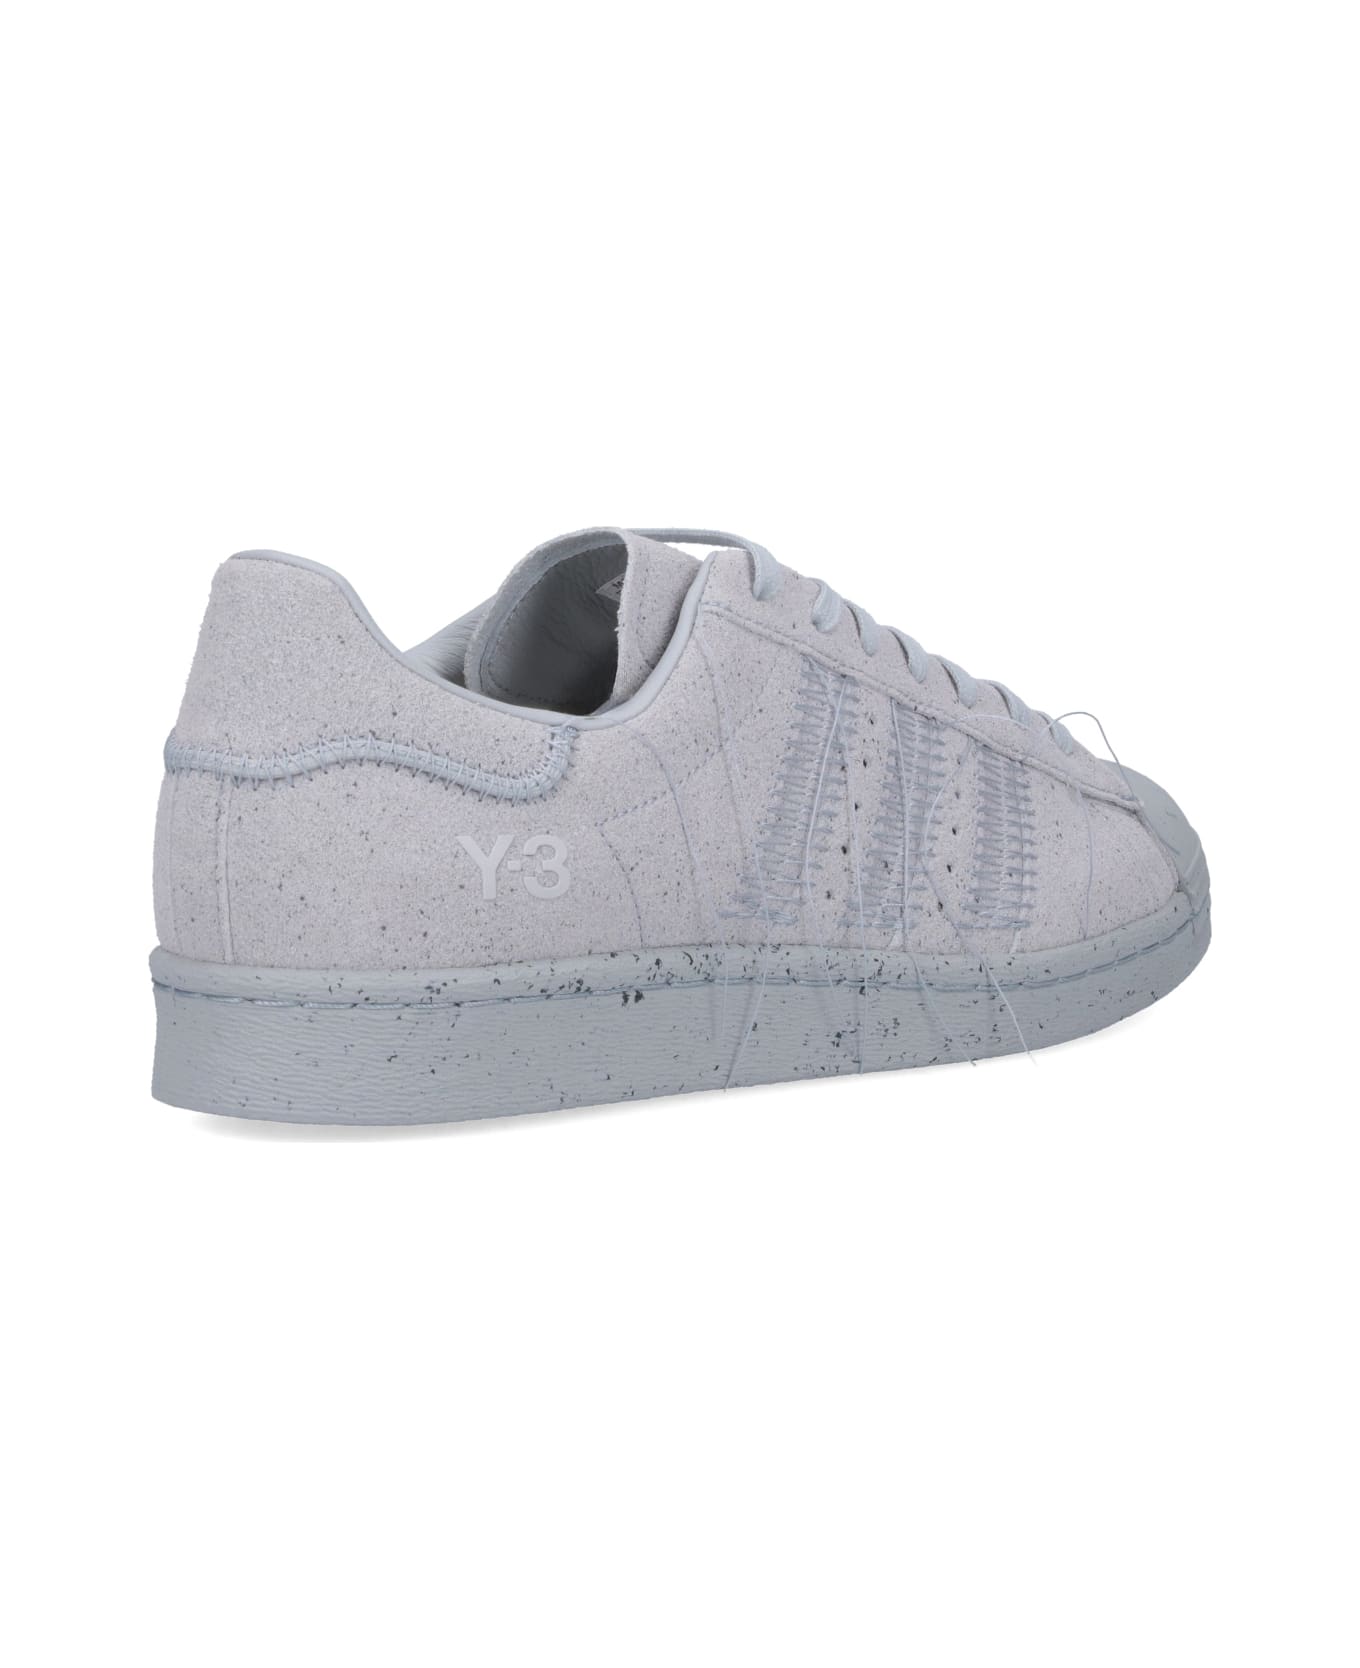 Y-3 'clear Onix' Sneakers - Gray